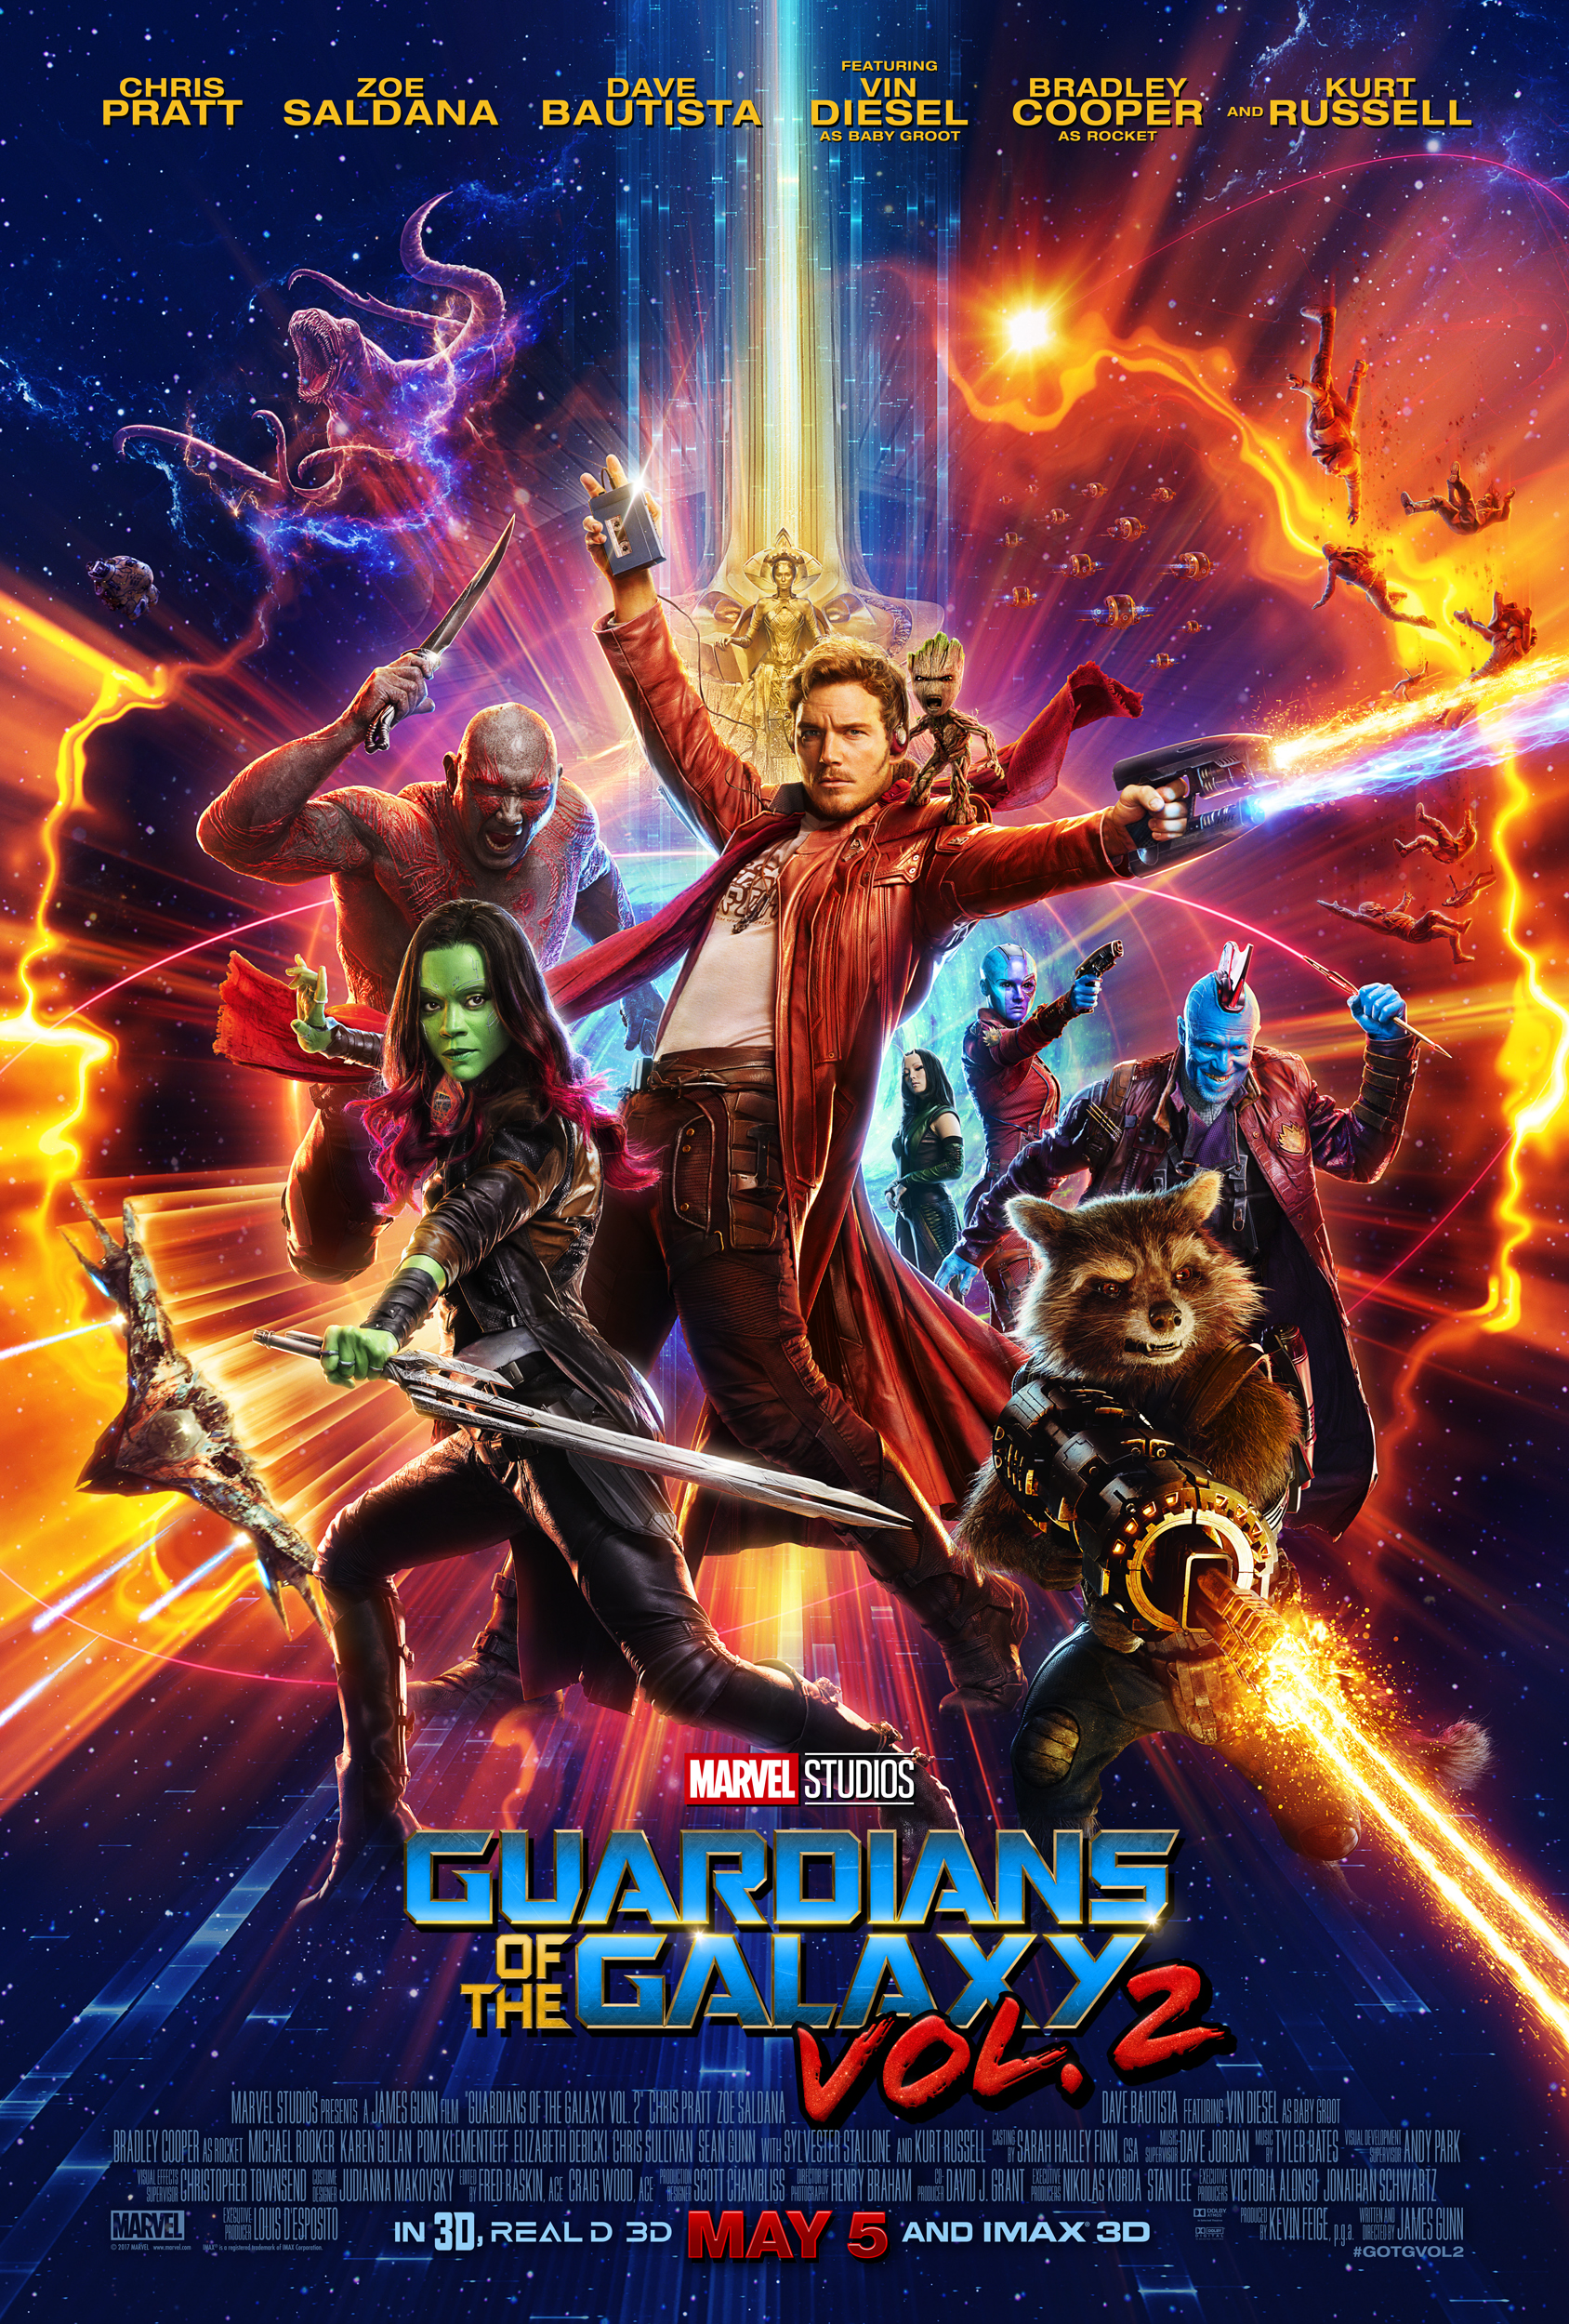 Guardians of the Galaxy Vol. 2 Payoff Poster